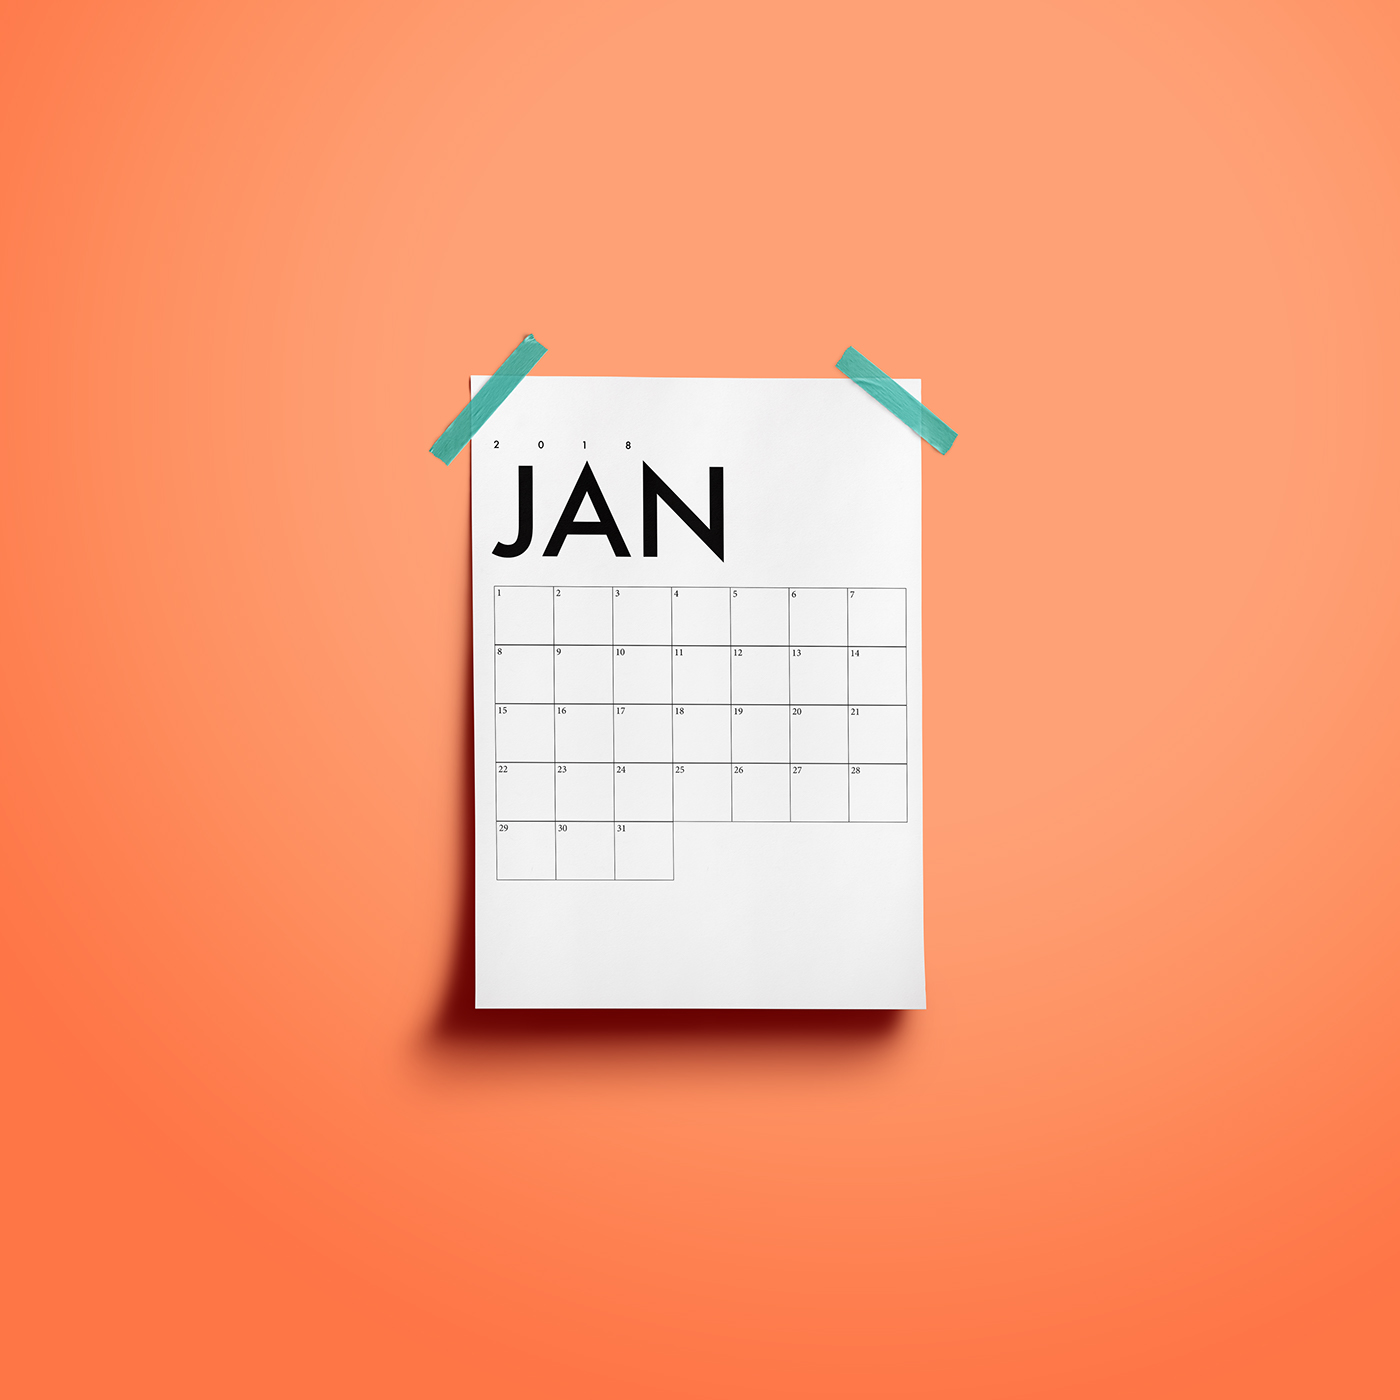 Download 30 Free PSD Calendar Templates & Mockups to create the ...